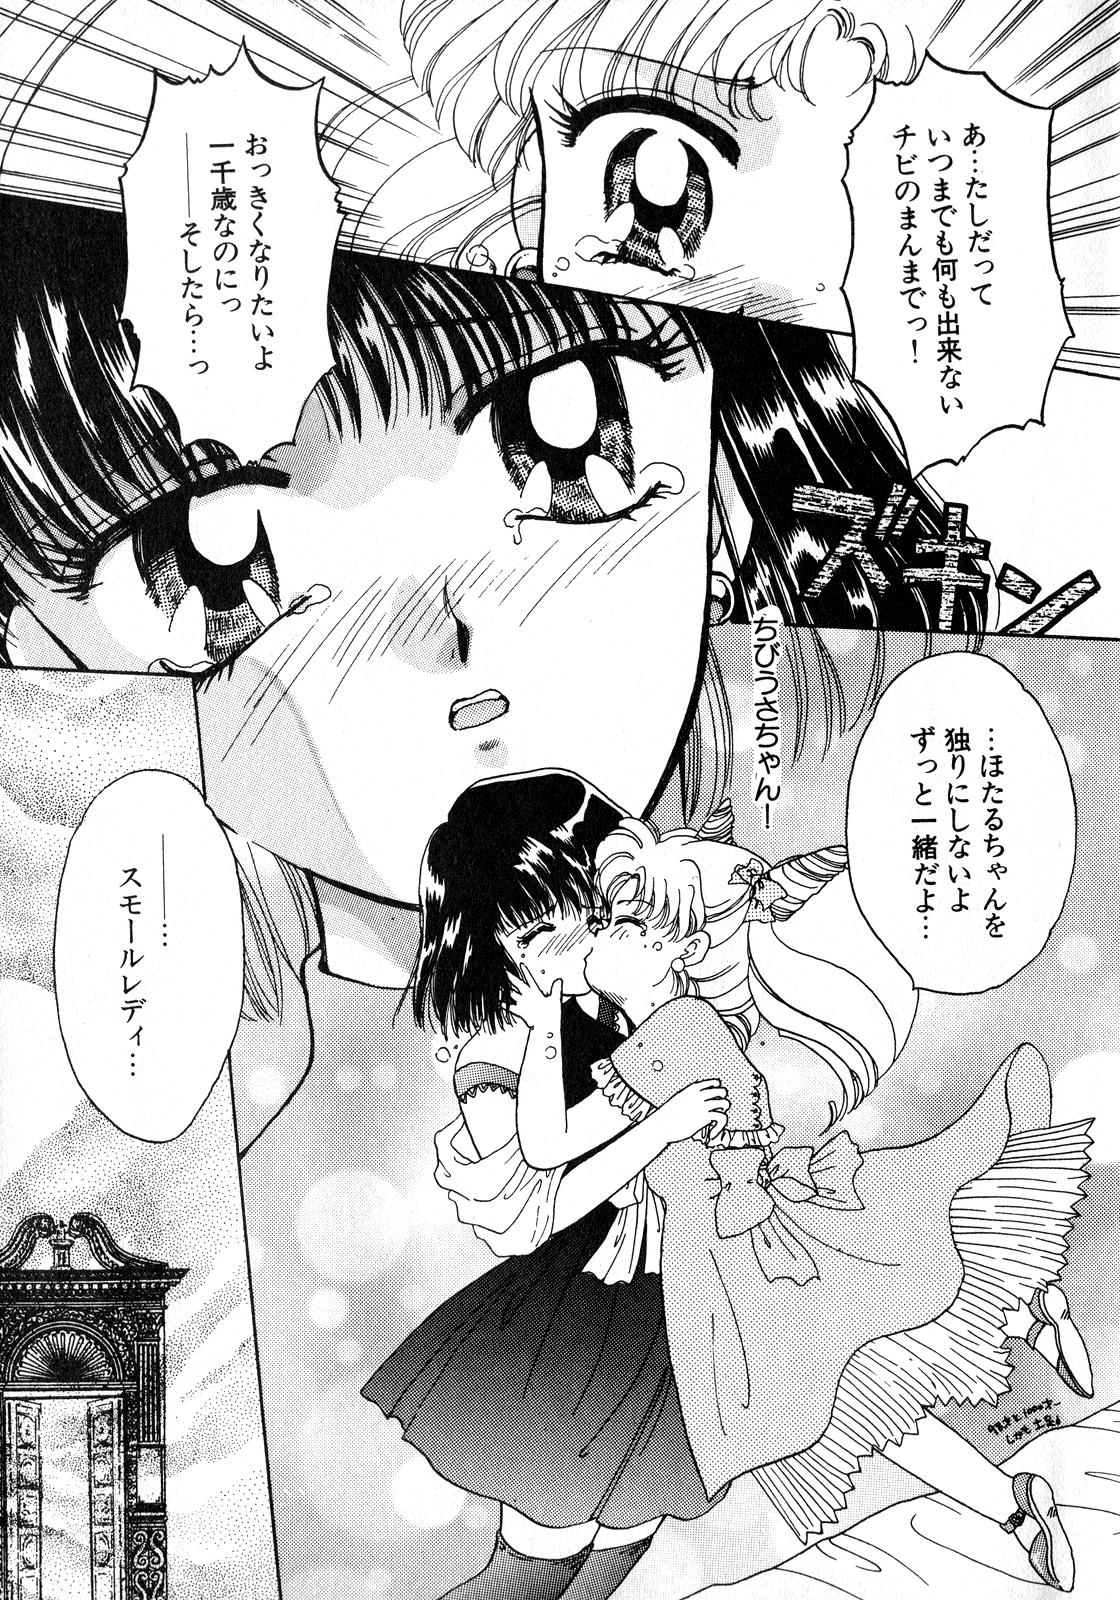 Huge Lunatic Party 8 - Sailor moon Gay Anal - Page 8